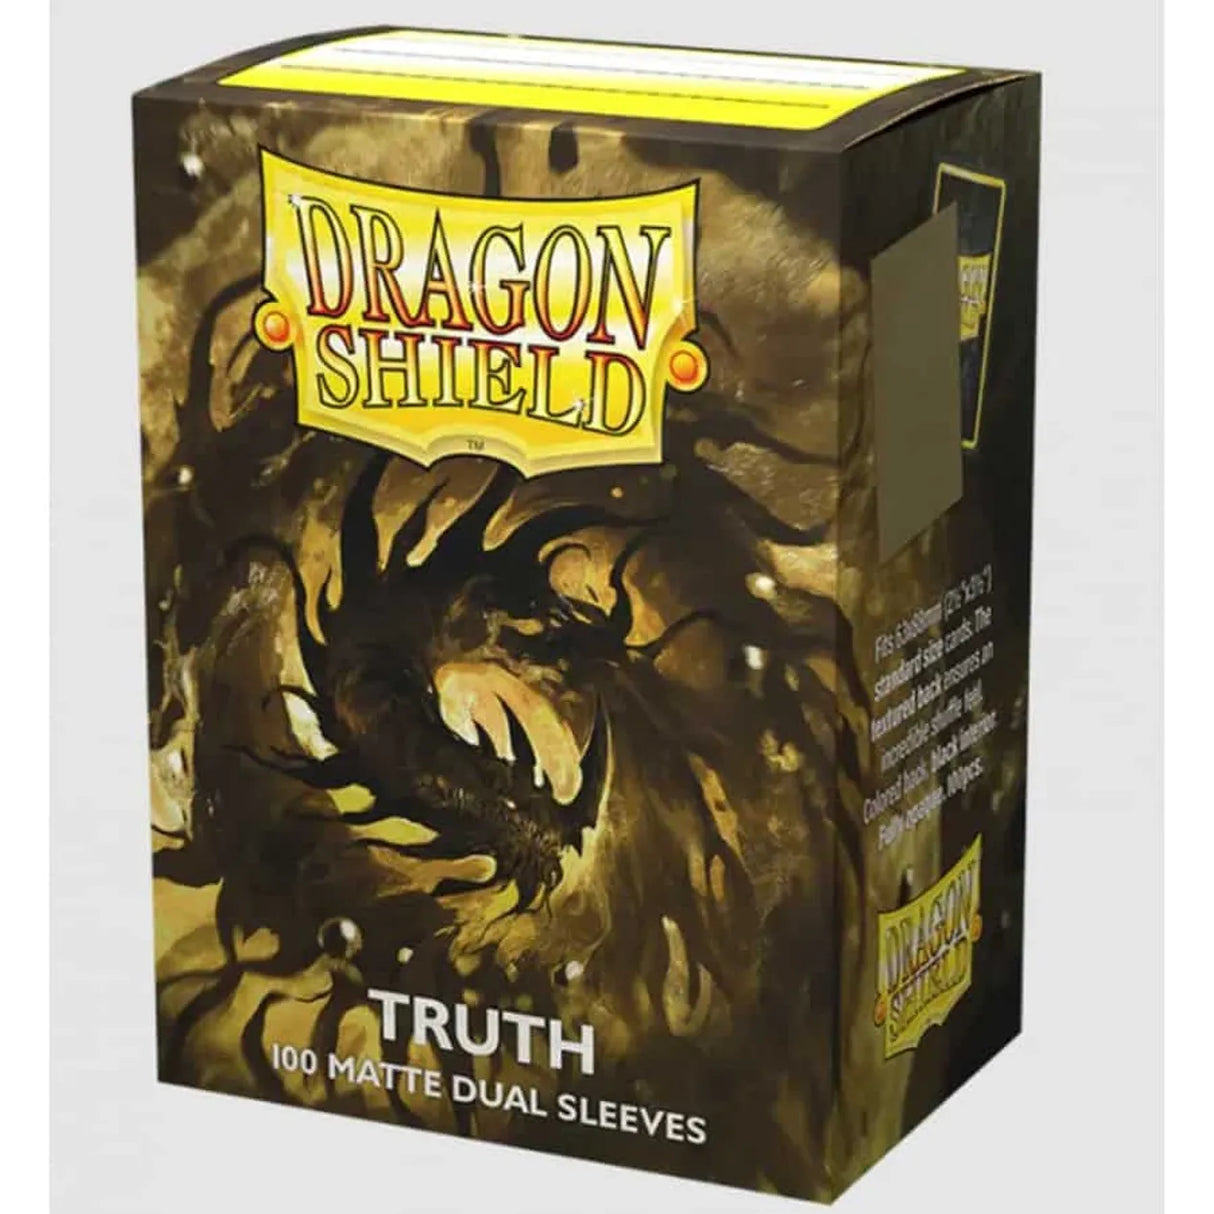 Dragon Shield Deck Protector Sleeves - Matte Dual Truth (100 Count)